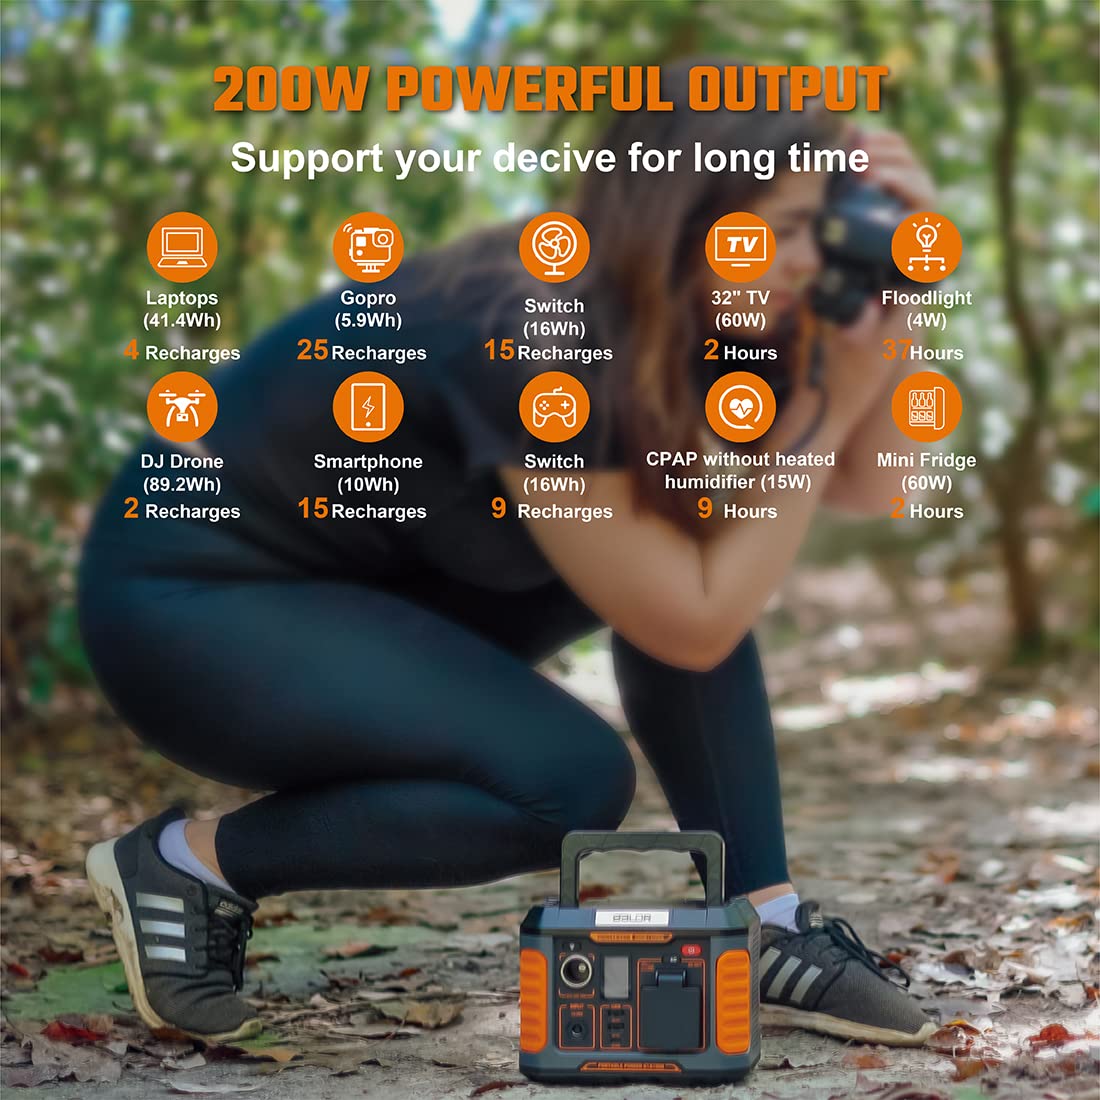 BALDR Portable Power Station, Solar Generator with 200W/120V Pure Sine Wave AC Outlet, 173Wh Backup Lithium Battery For Camping Travel Hunting Outdoors